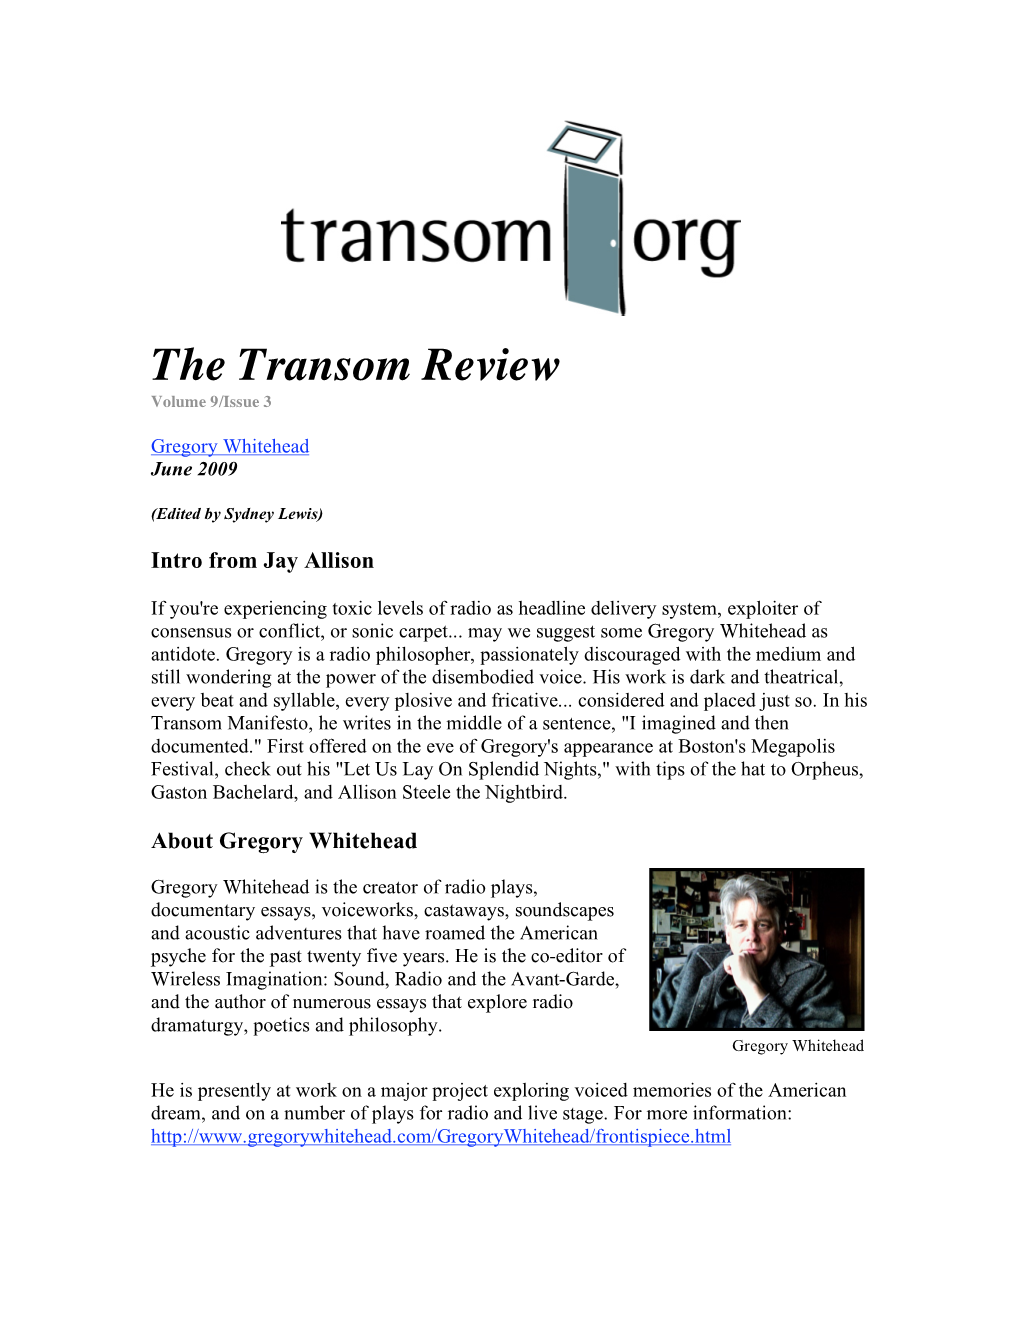 The Transom Review Volume 9/Issue 3 Gregory Whitehead June 2009